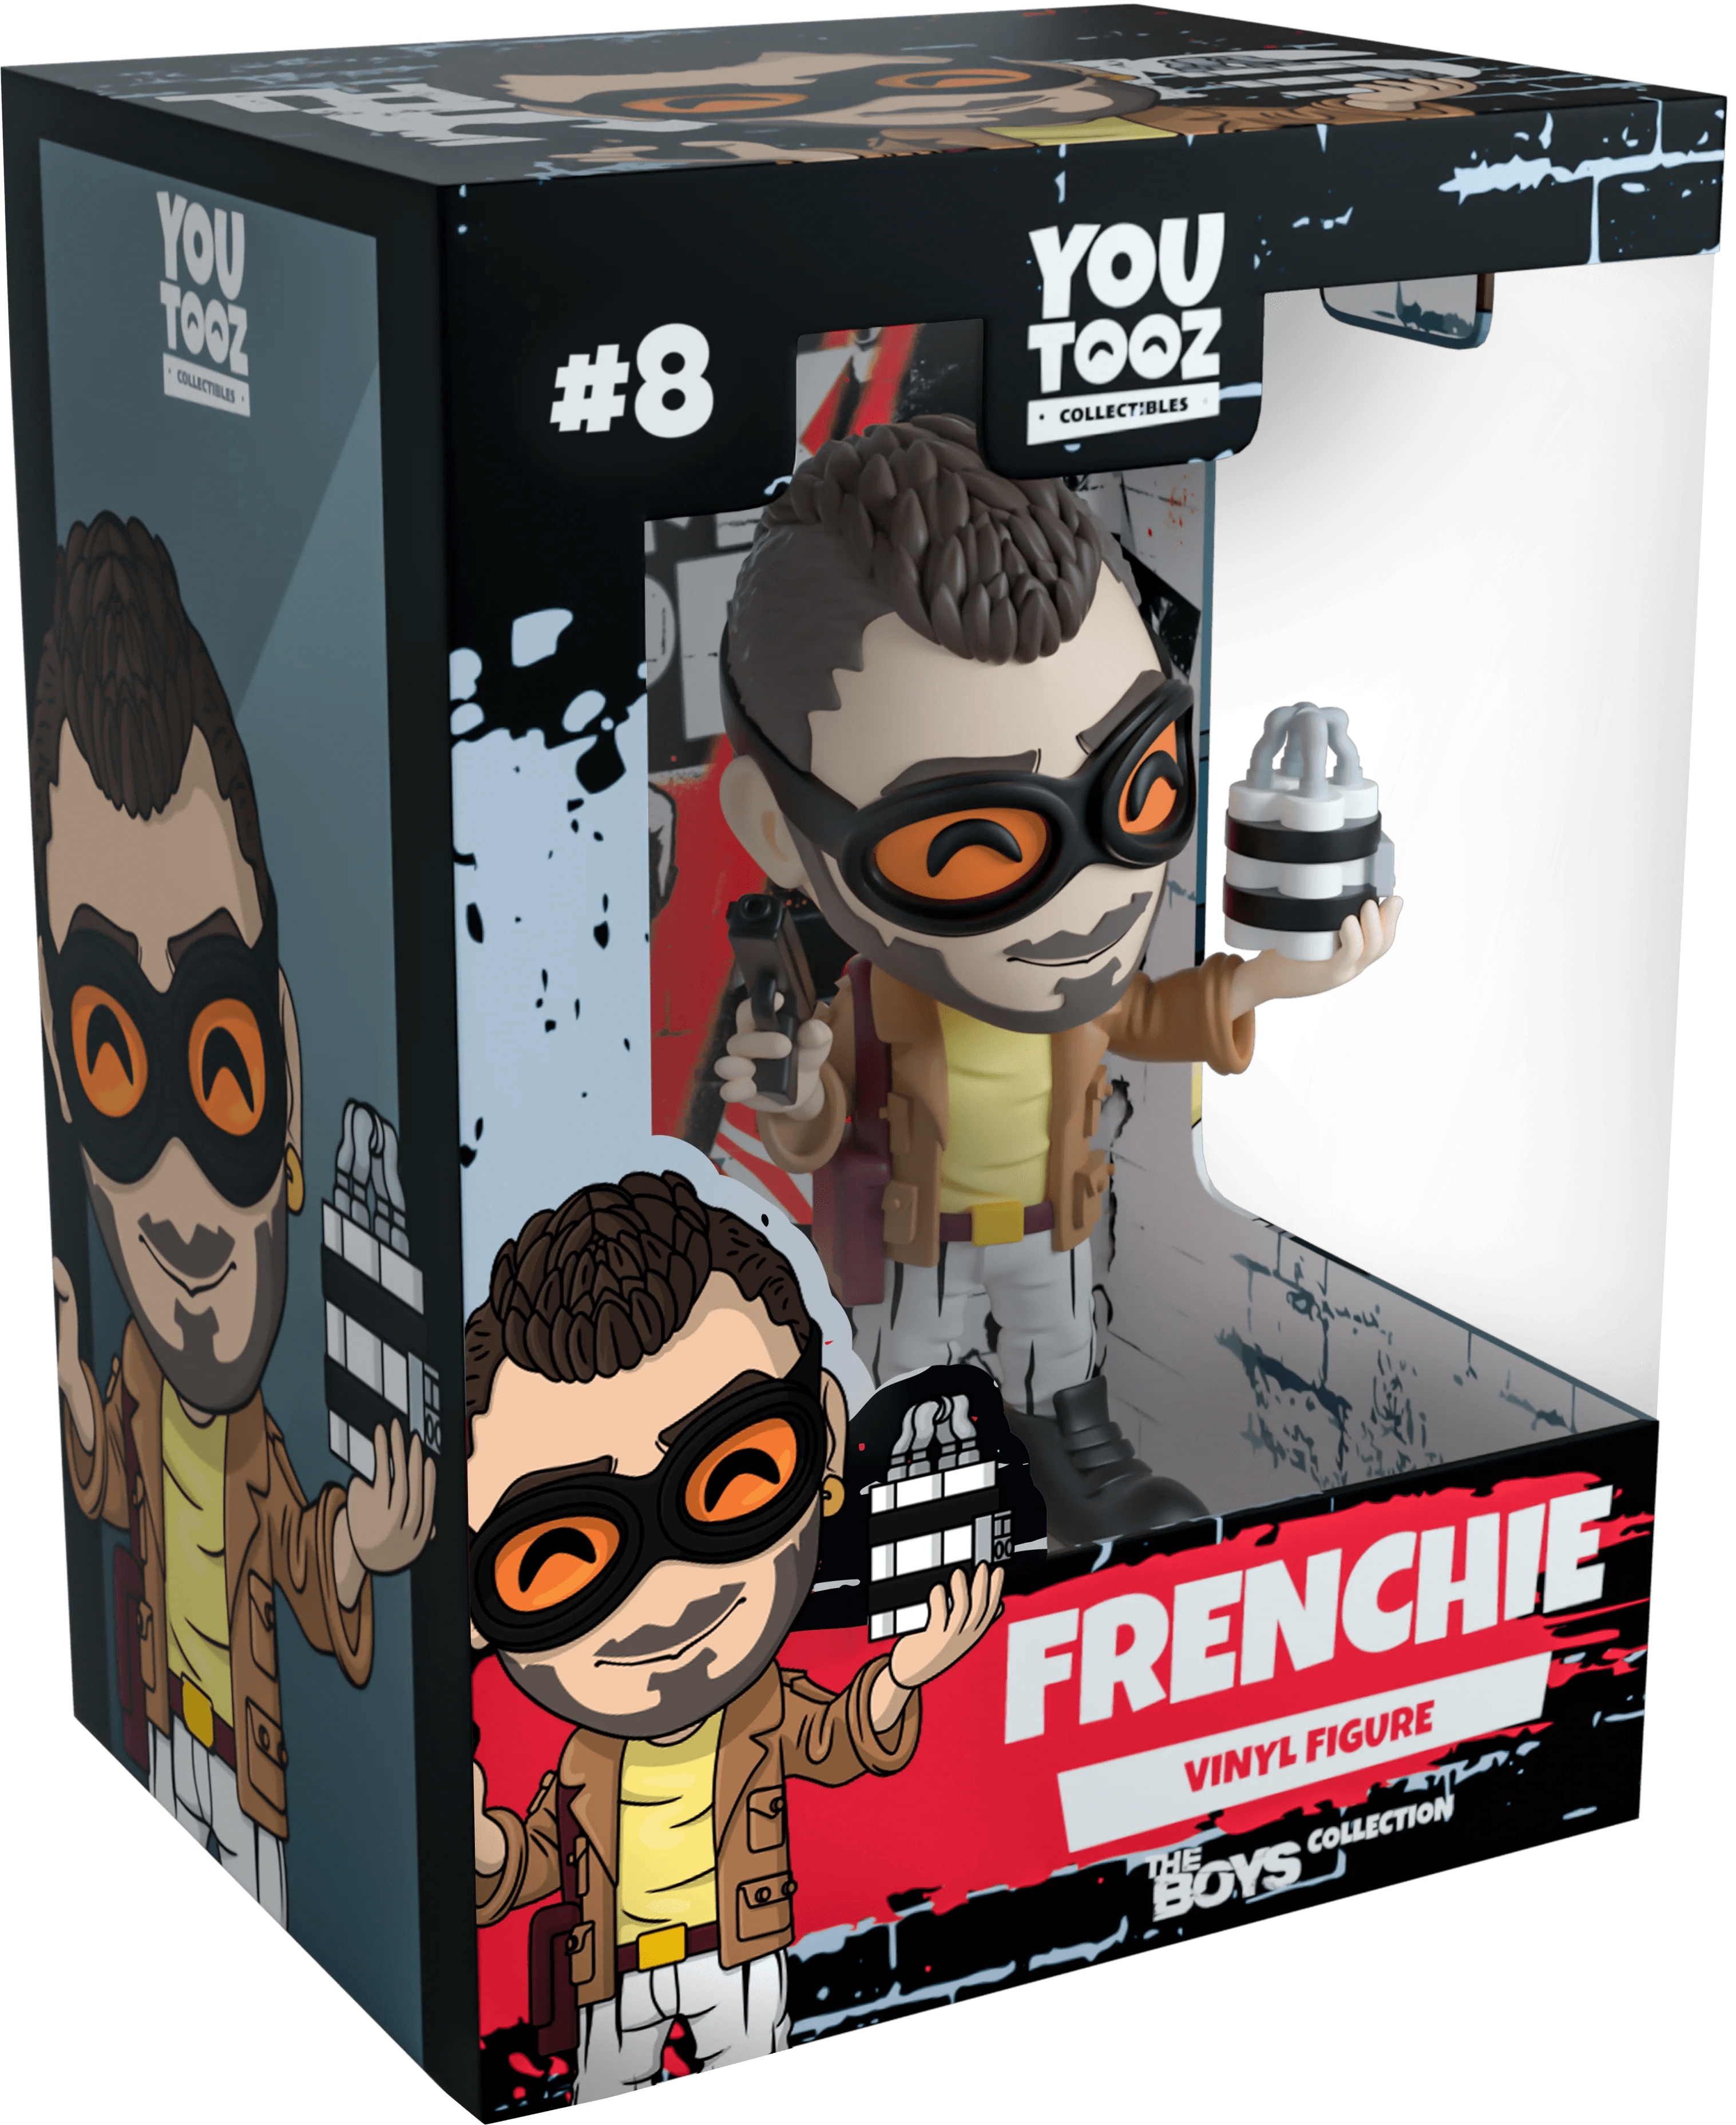 Youtooz - The Boys - Frenchie Vinyl Figure #6 - The Card Vault